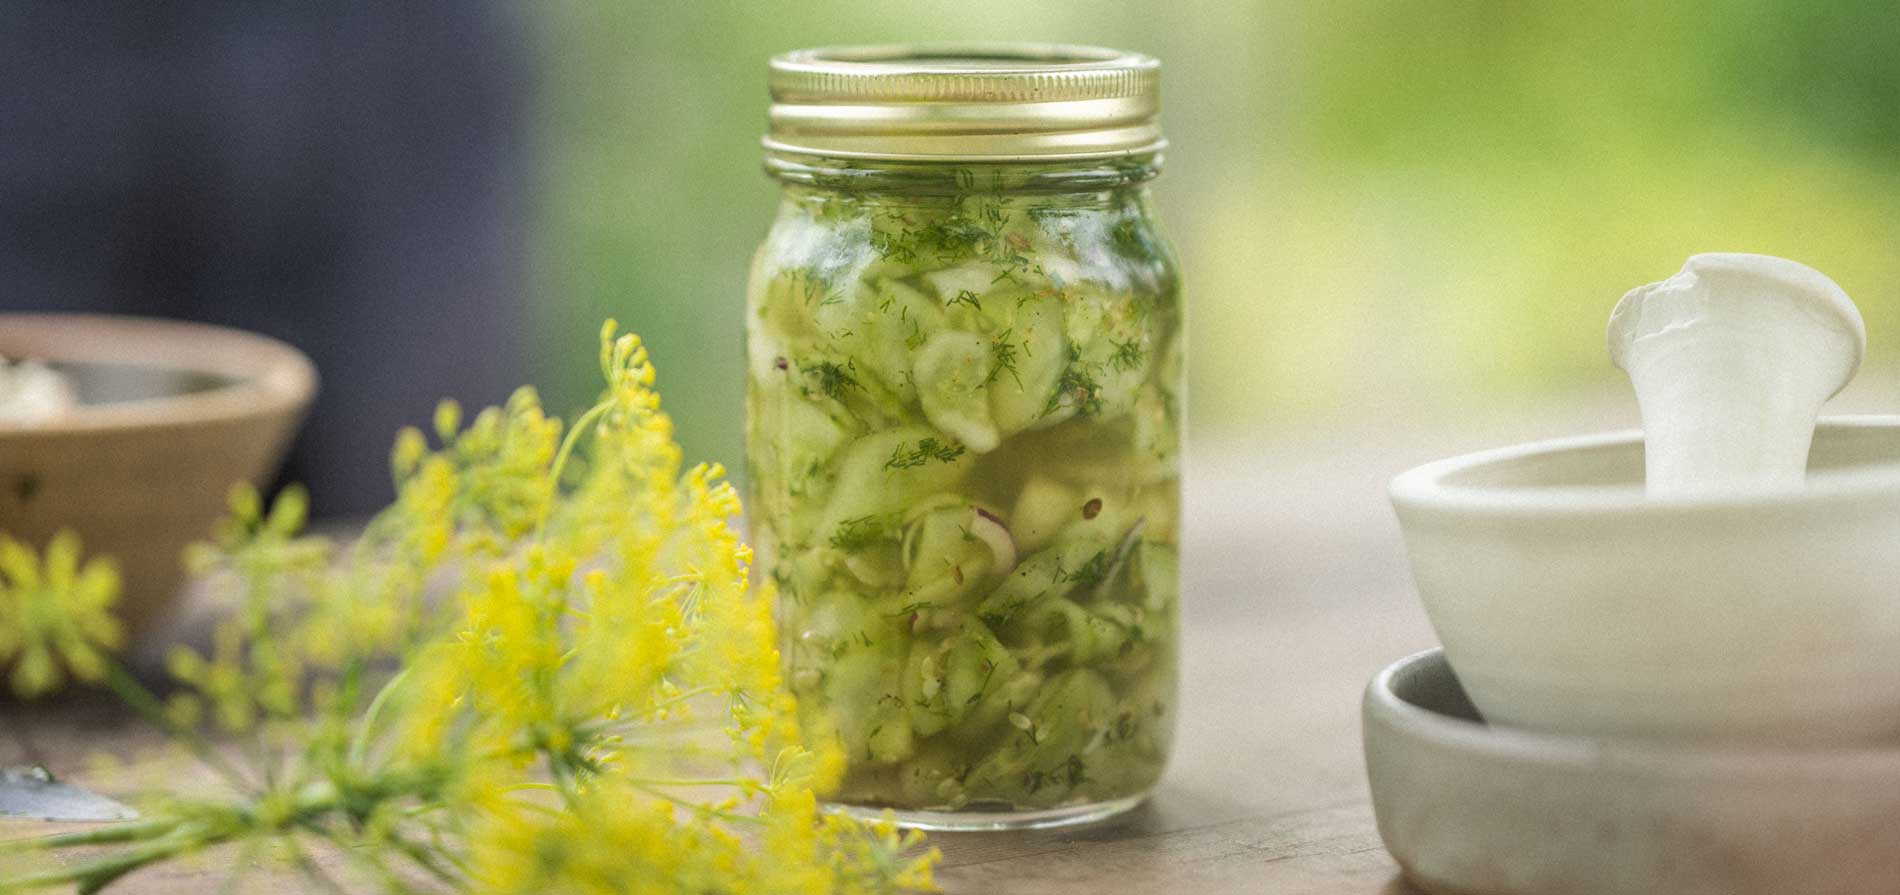 Gill Meller: Cucumber Salad with Dill and Apple Cider Vinegar